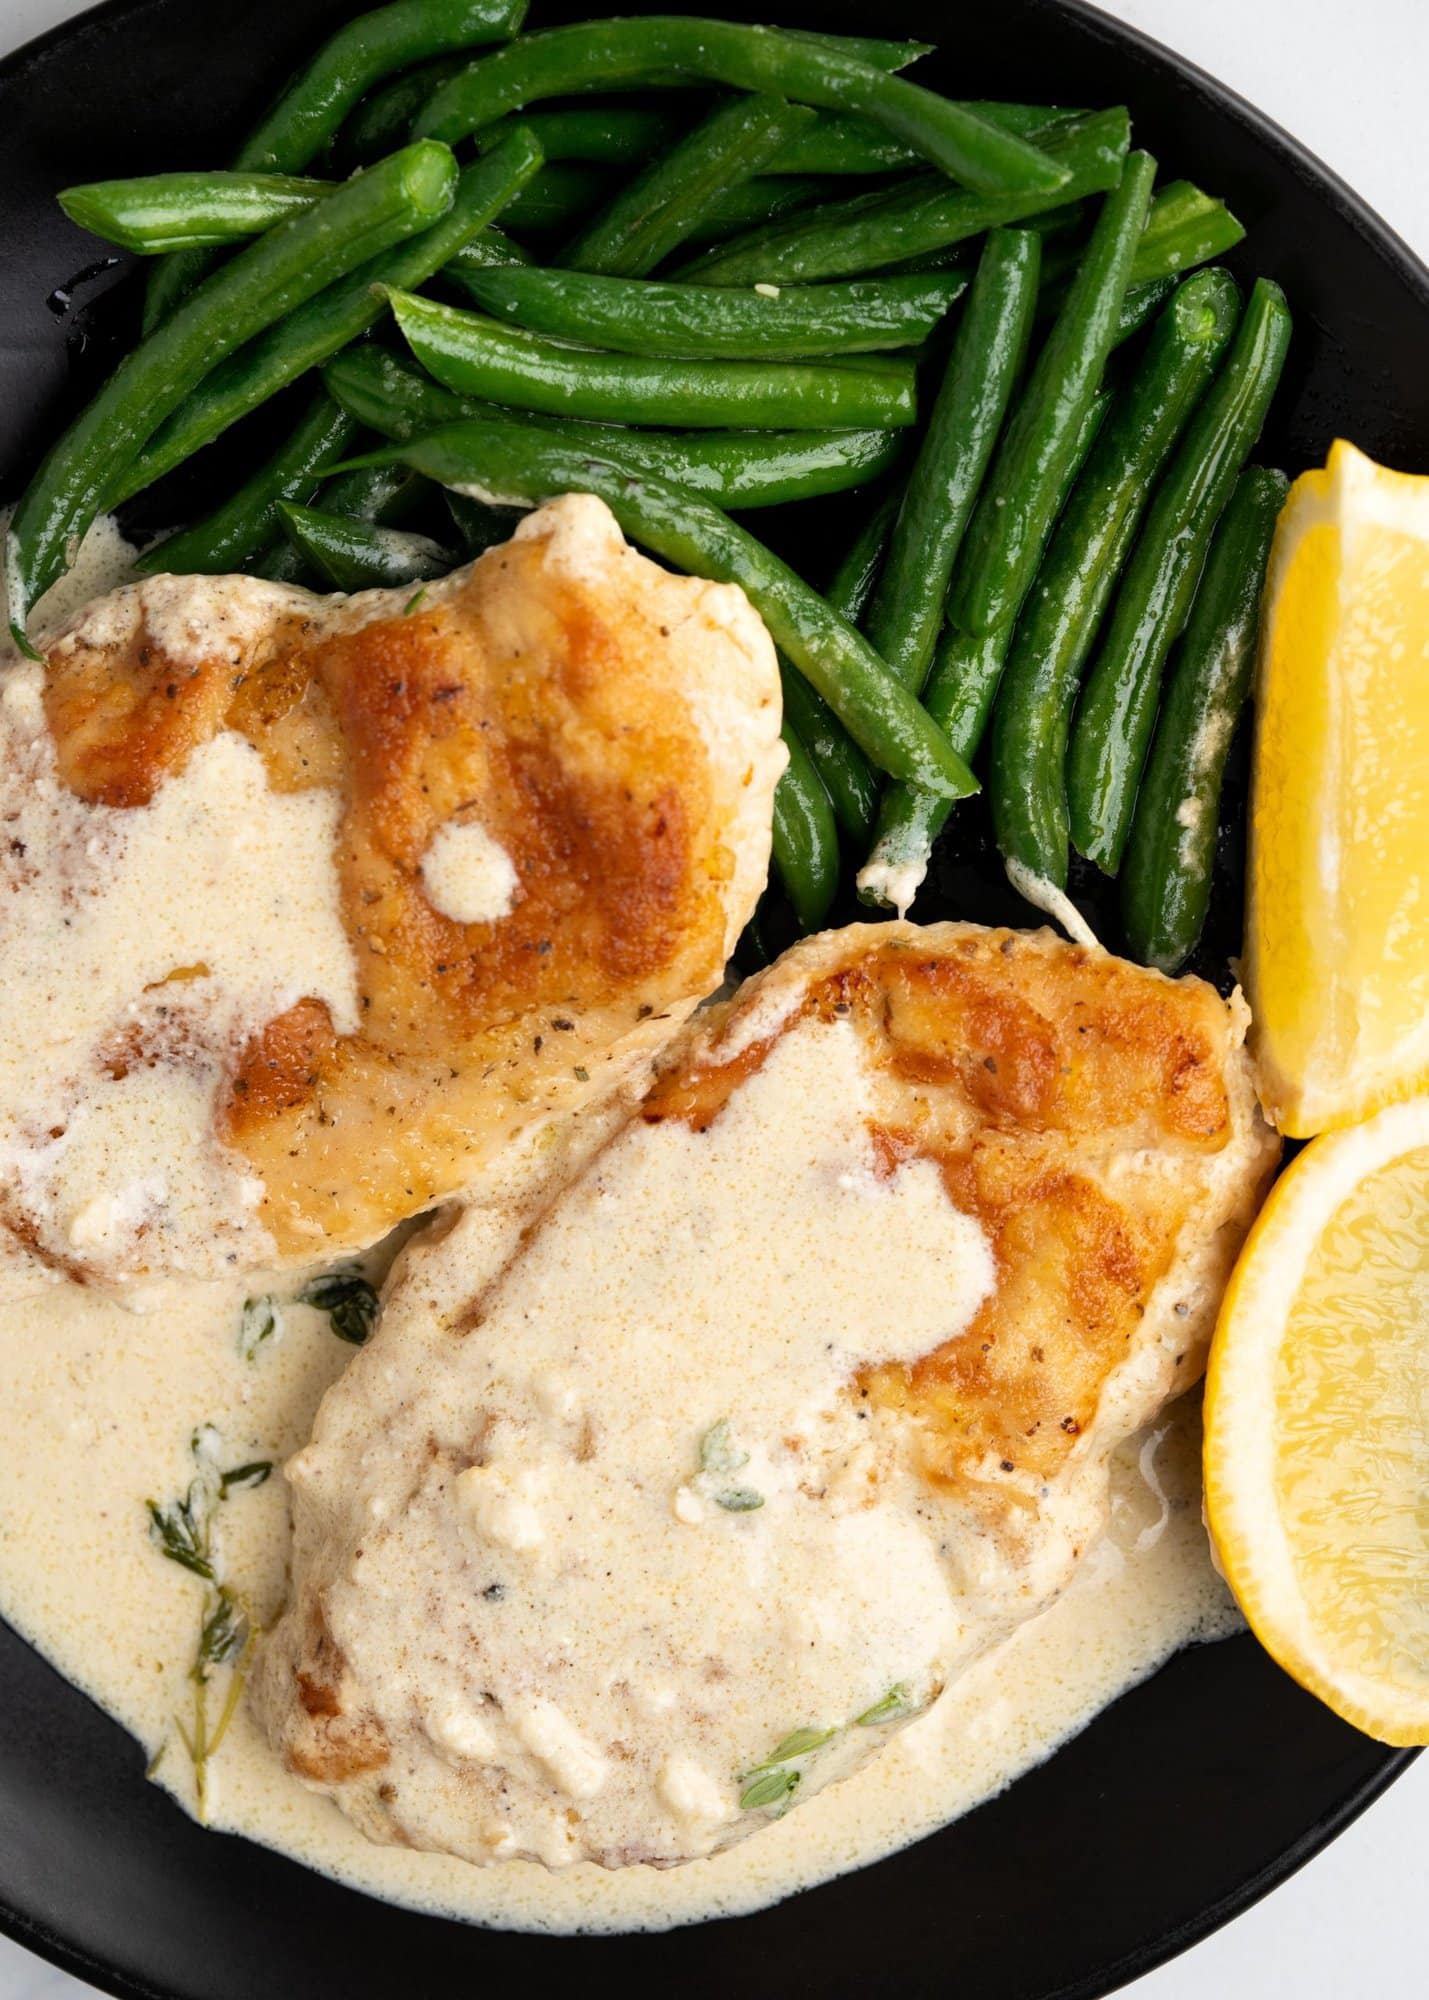 Crispy chicken breast served with creamy lemon sauce and side of veggies. 